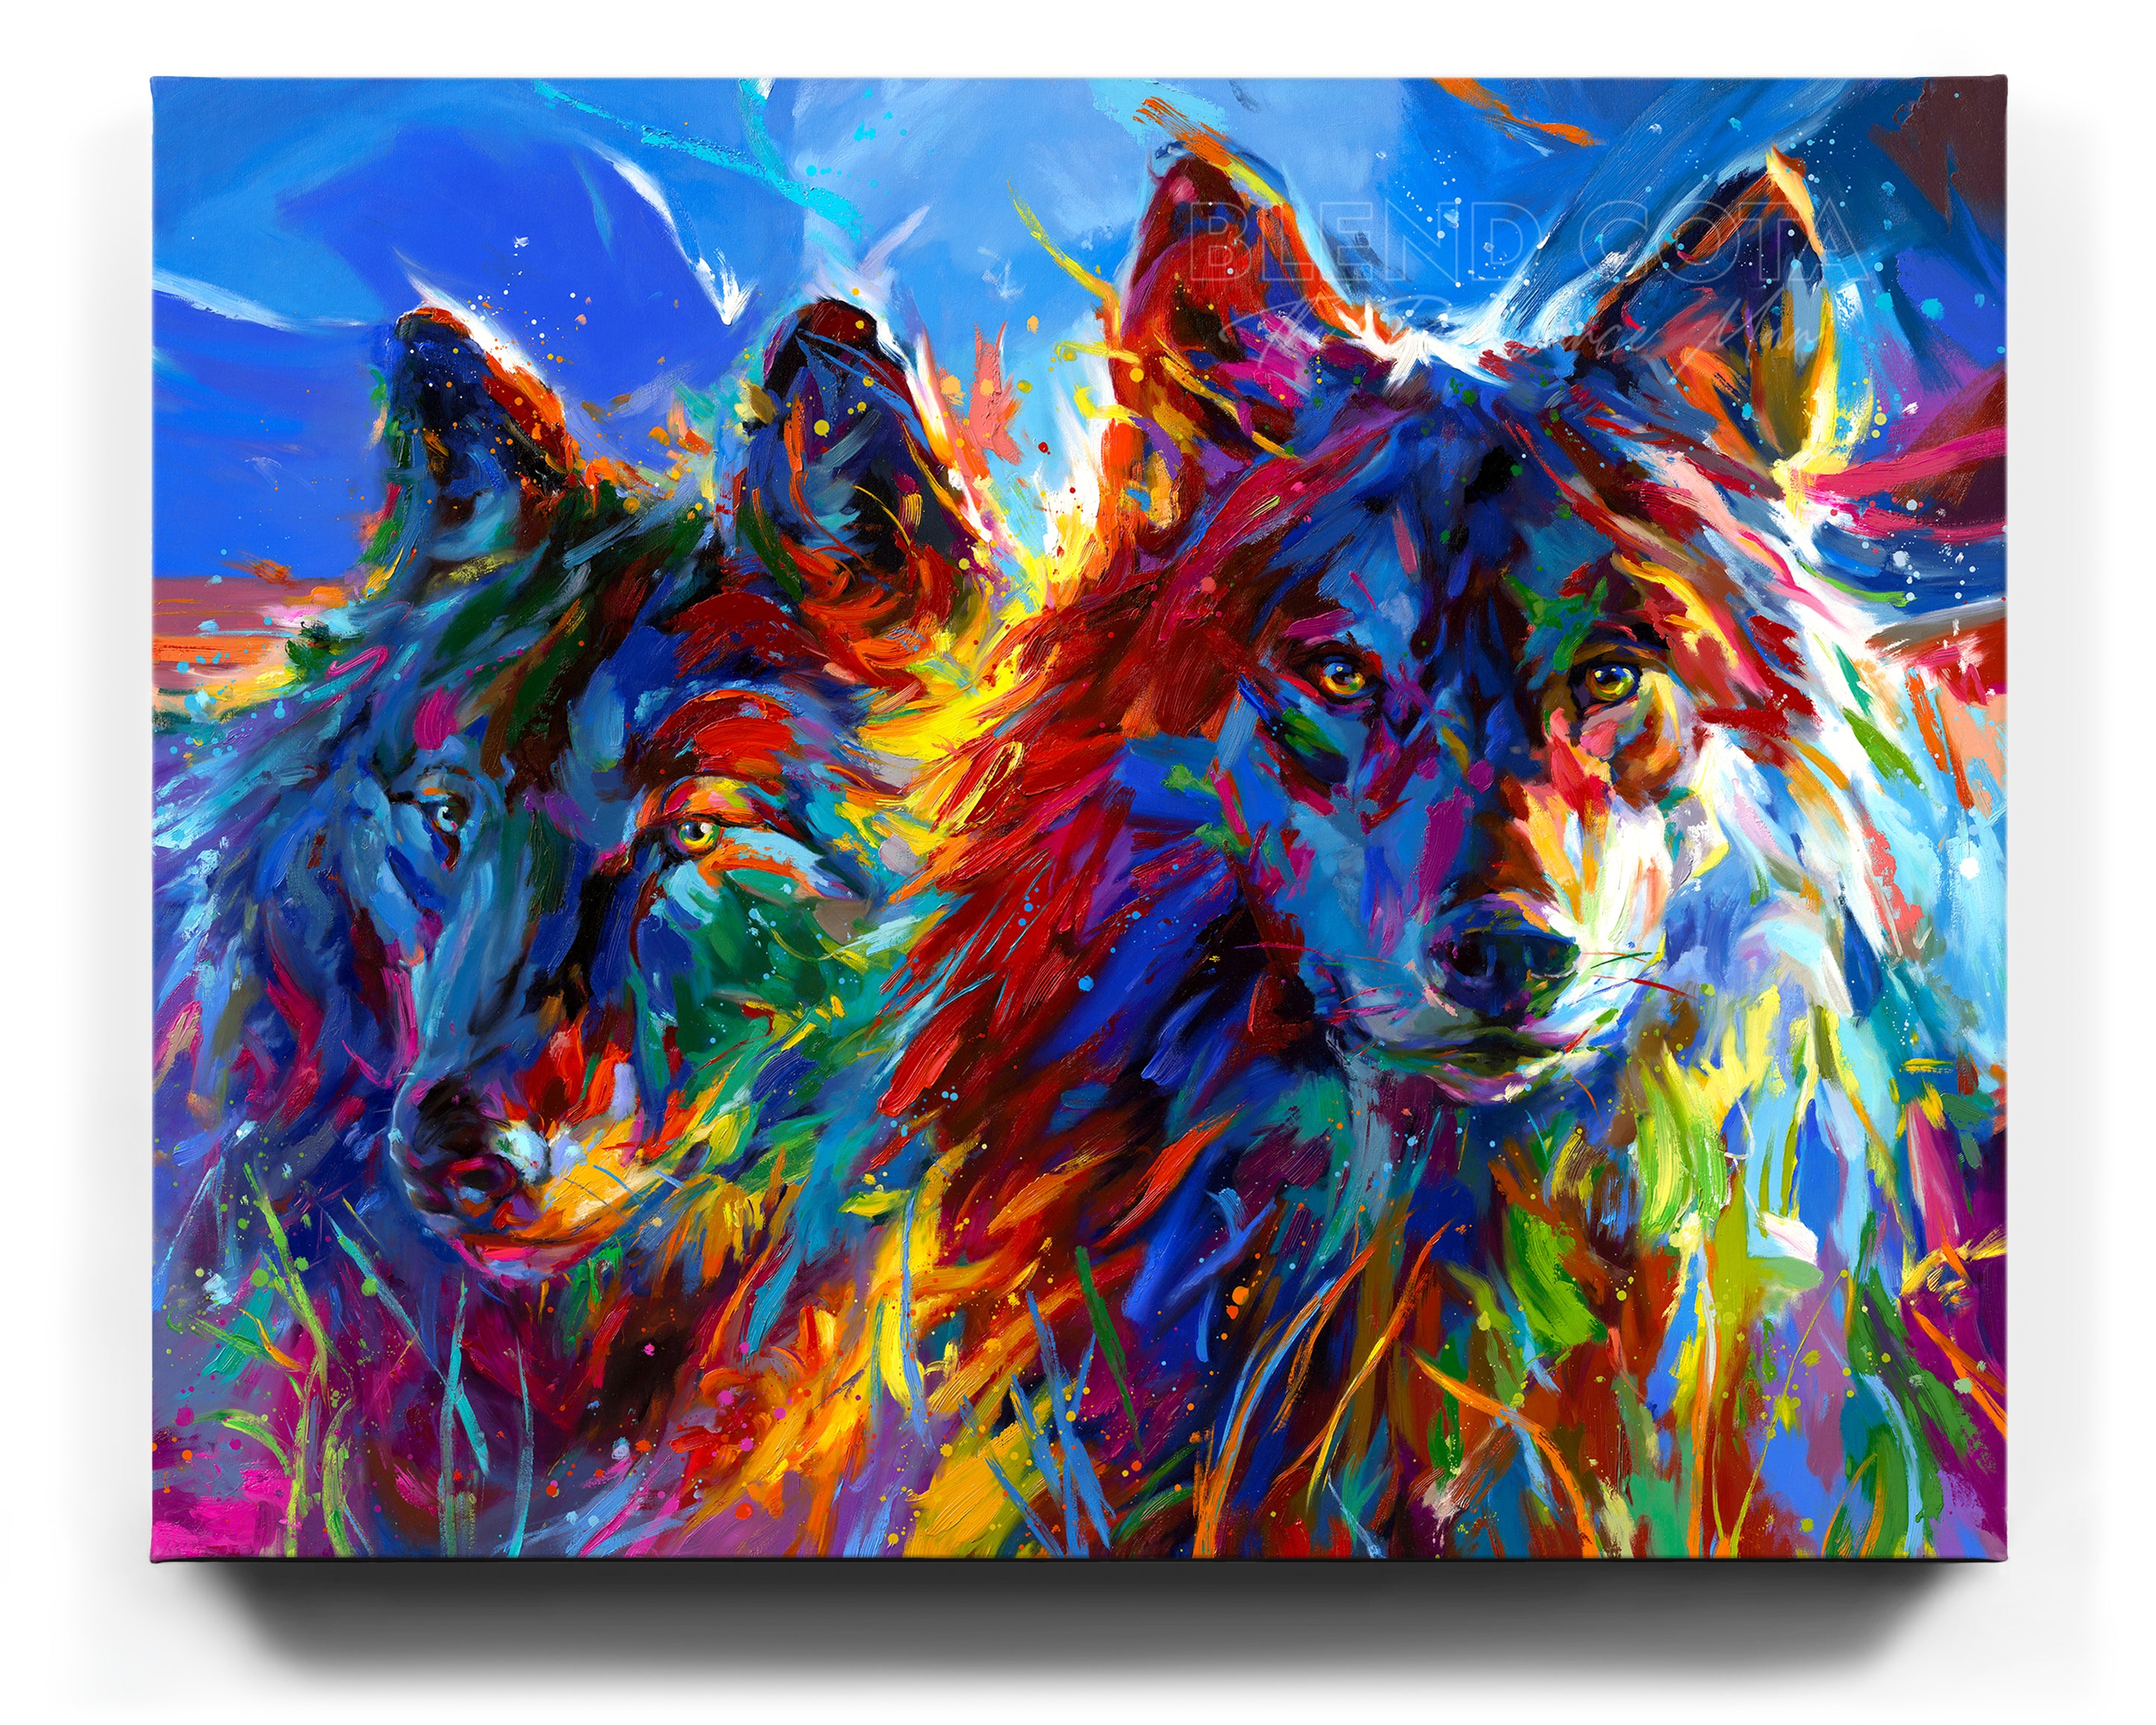 Wolves True Love painted by Blend Cota Limited Edition Art on Canvas from Blend Cota Studios 